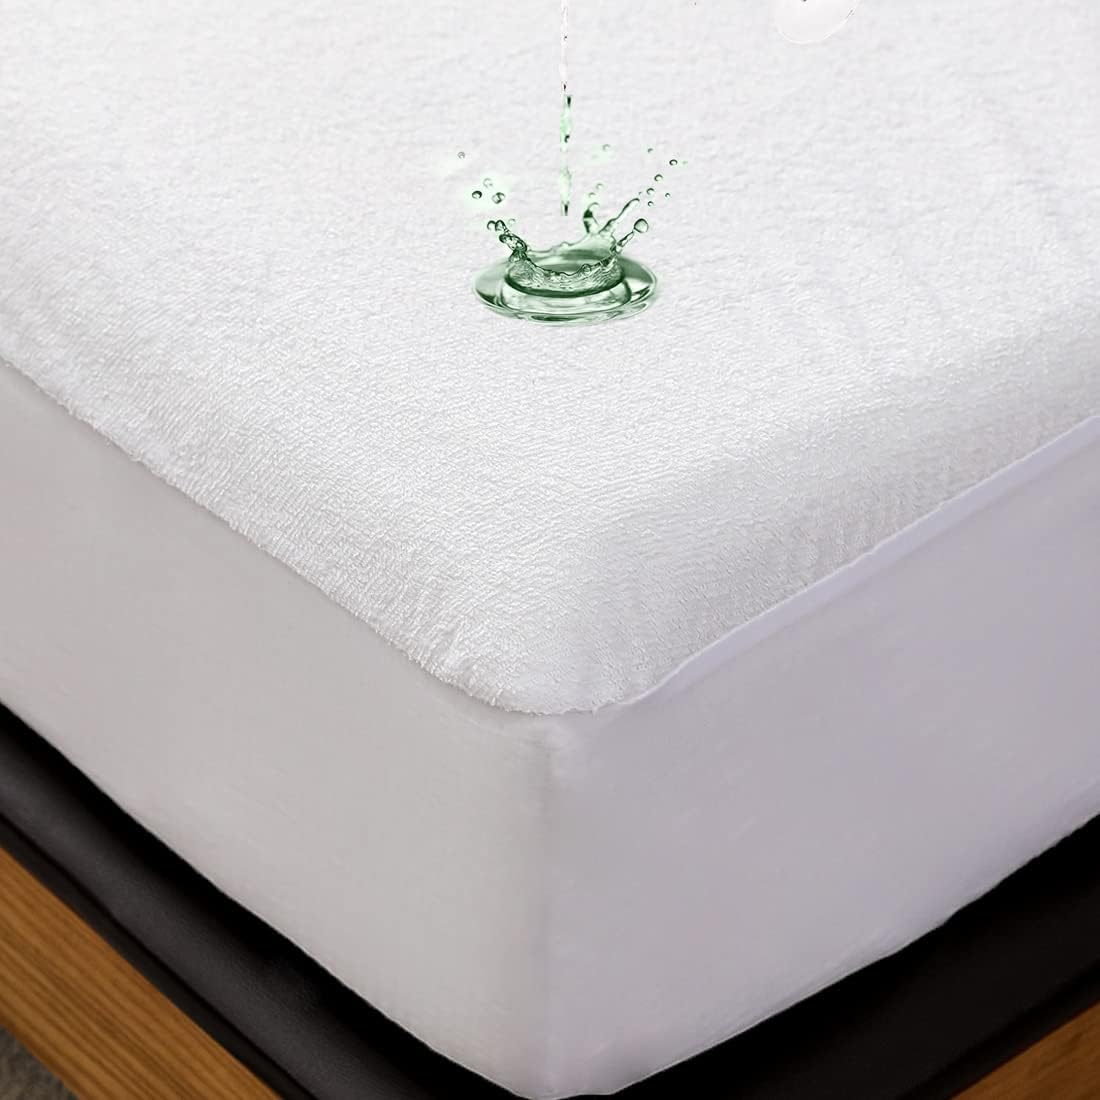 Full Size Waterproof Mattress Cover, Premium Terry Top Mattress Cover, Breathable, Noiseless, Cooing & Machine-Washable Bed Cover with 21" Deep Pocket